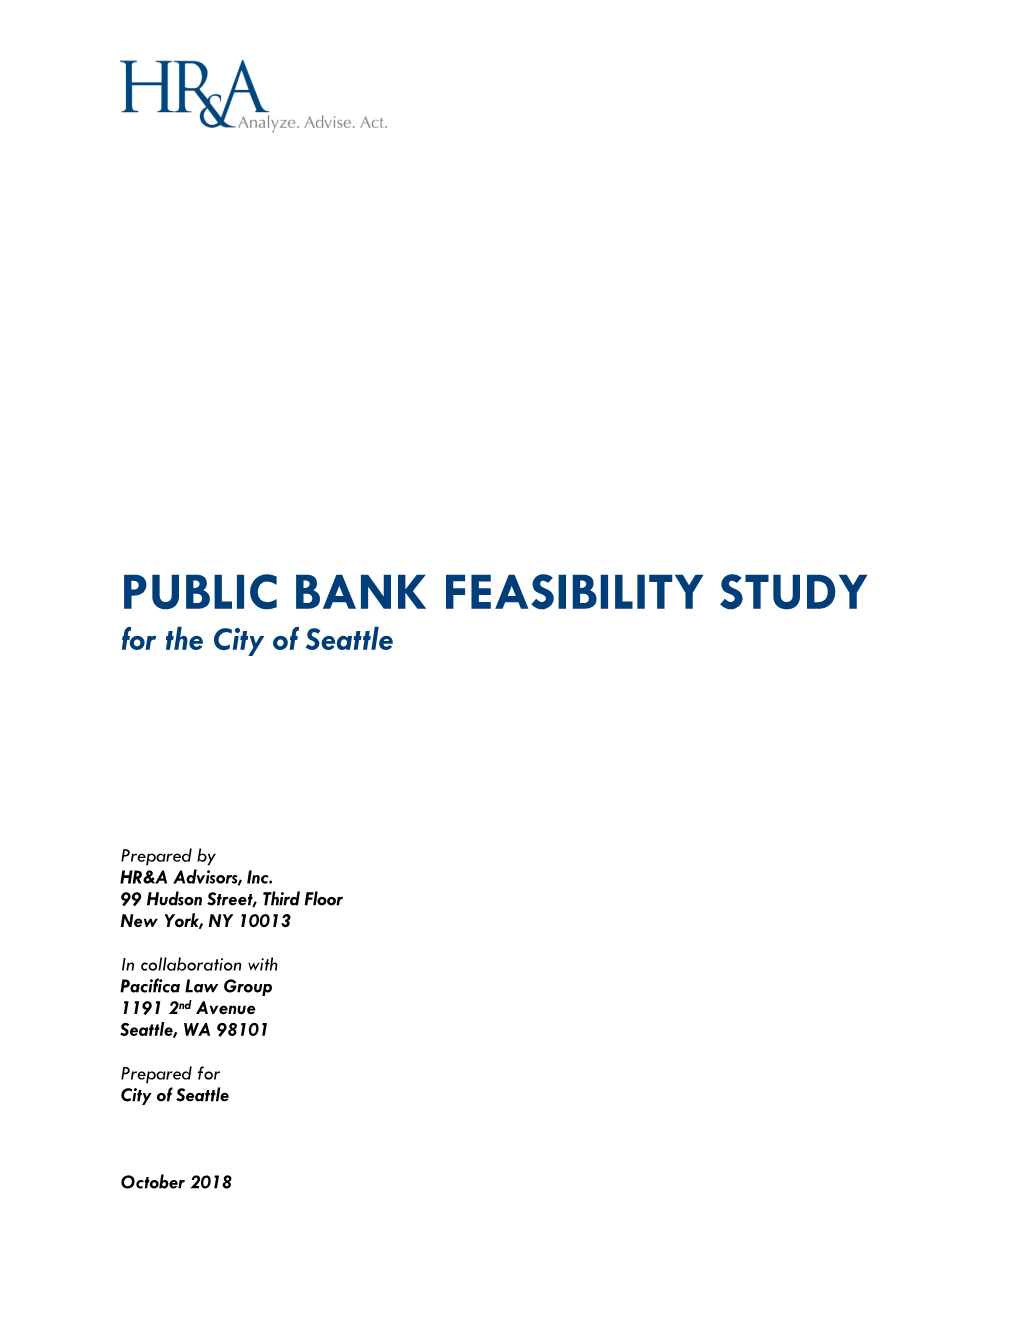 PUBLIC BANK FEASIBILITY STUDY for the City of Seattle